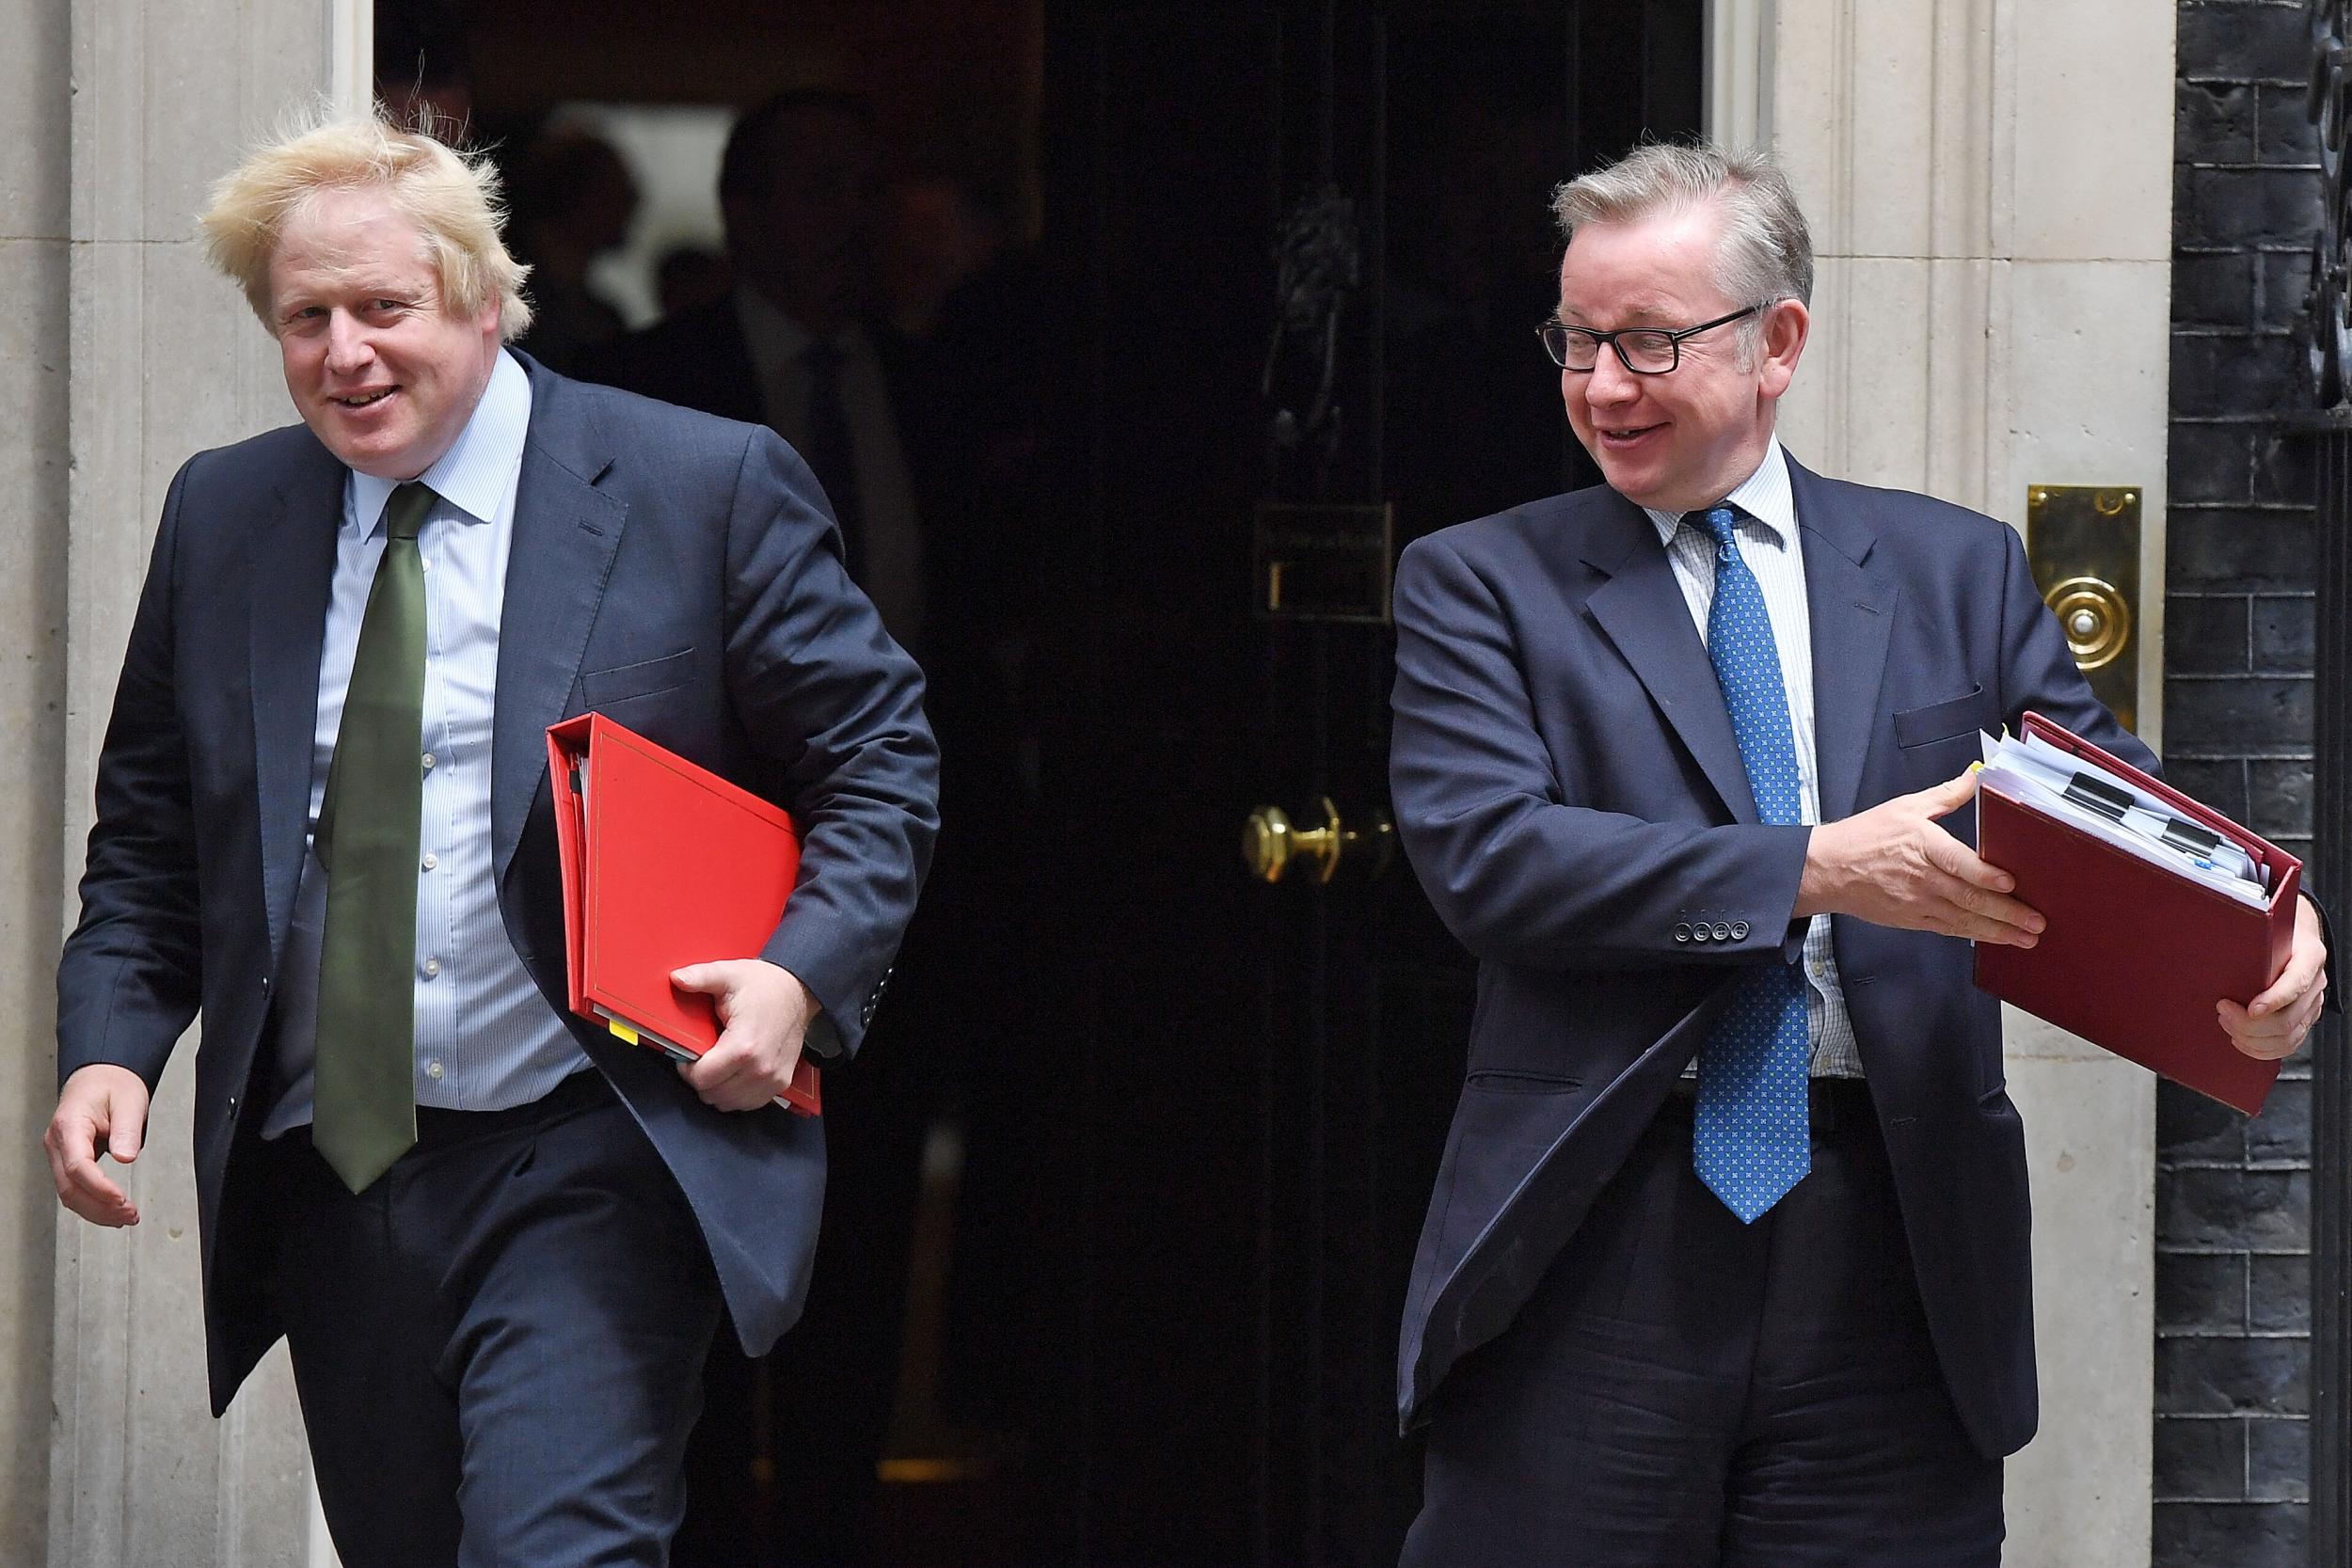 Boris Johnson and Michael Gove are now both in the Cabinet (Getty)